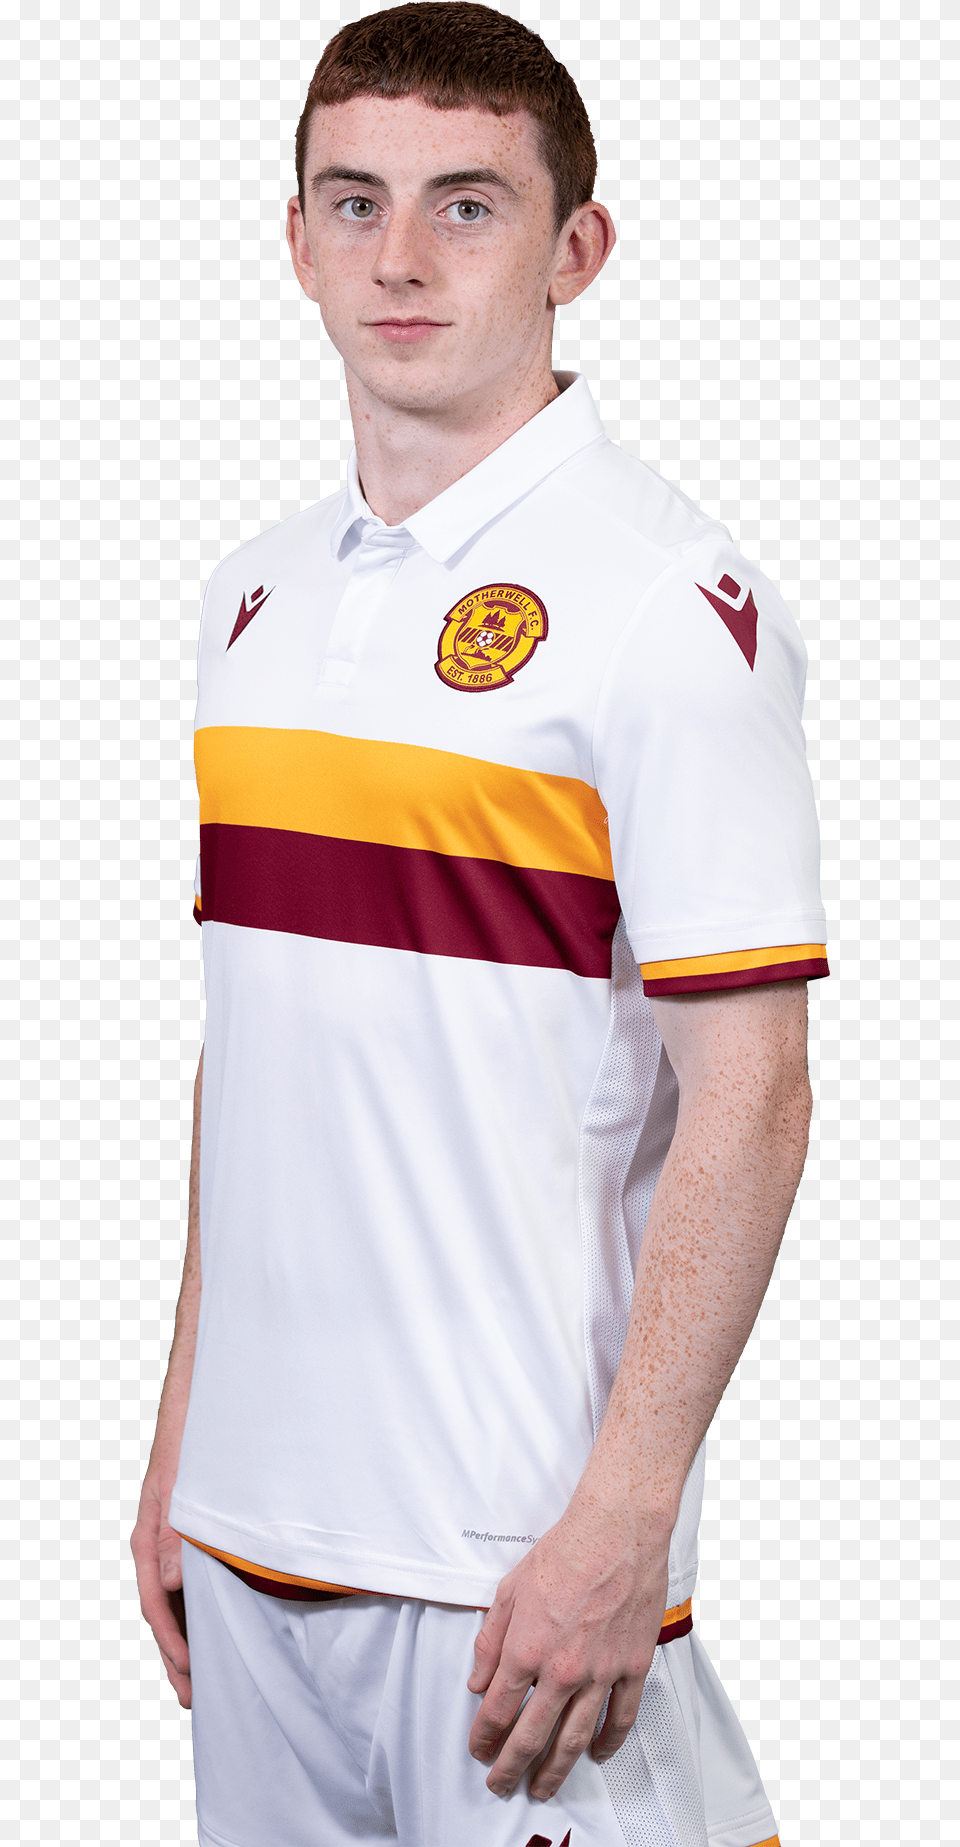 Paul Hale Polo Shirt, Clothing, Adult, Person, Man Png Image